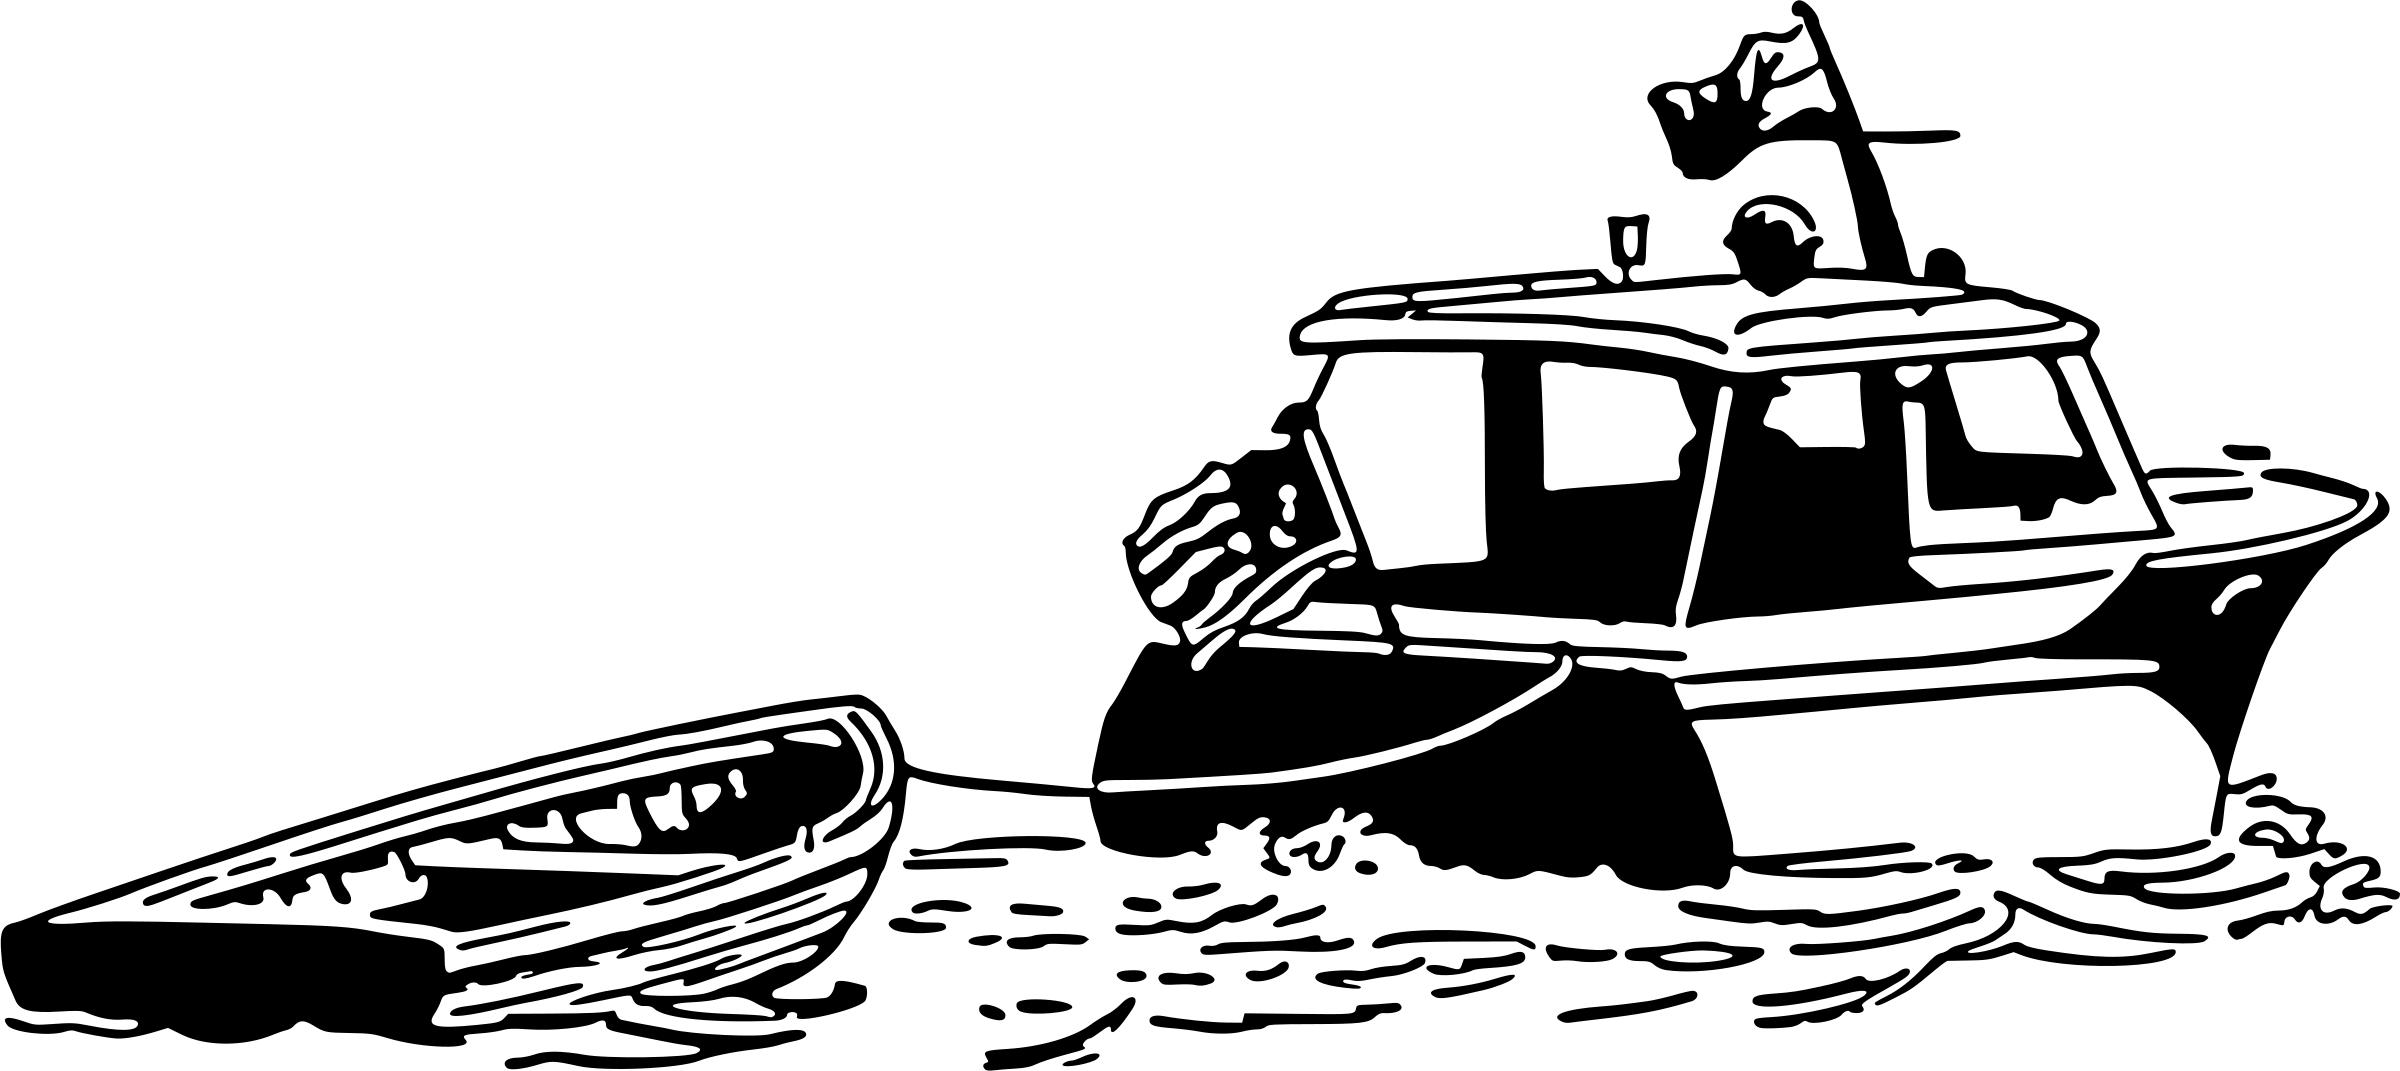 Boat with dinghy png